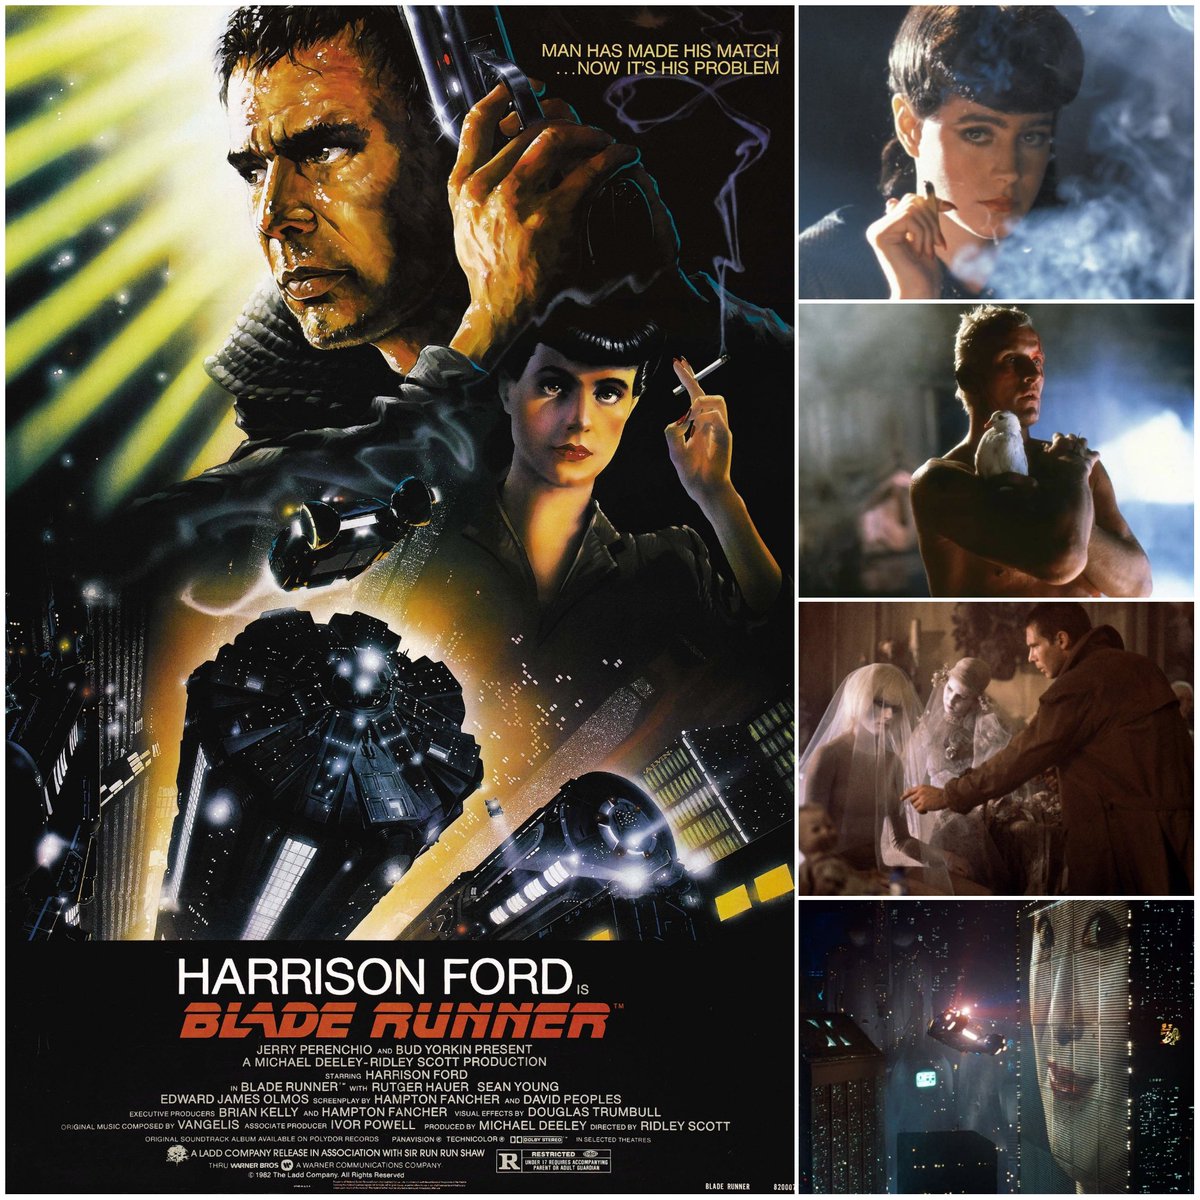 Ridley Scott's ‘Blade Runner’ was released on this day 40 years ago! (June 25, 1982) 

#HarrisonFord #RutgerHauer #SeanYoung #DarylHannah #EdwardJamesOlmos  #JamesHong #80sMovie